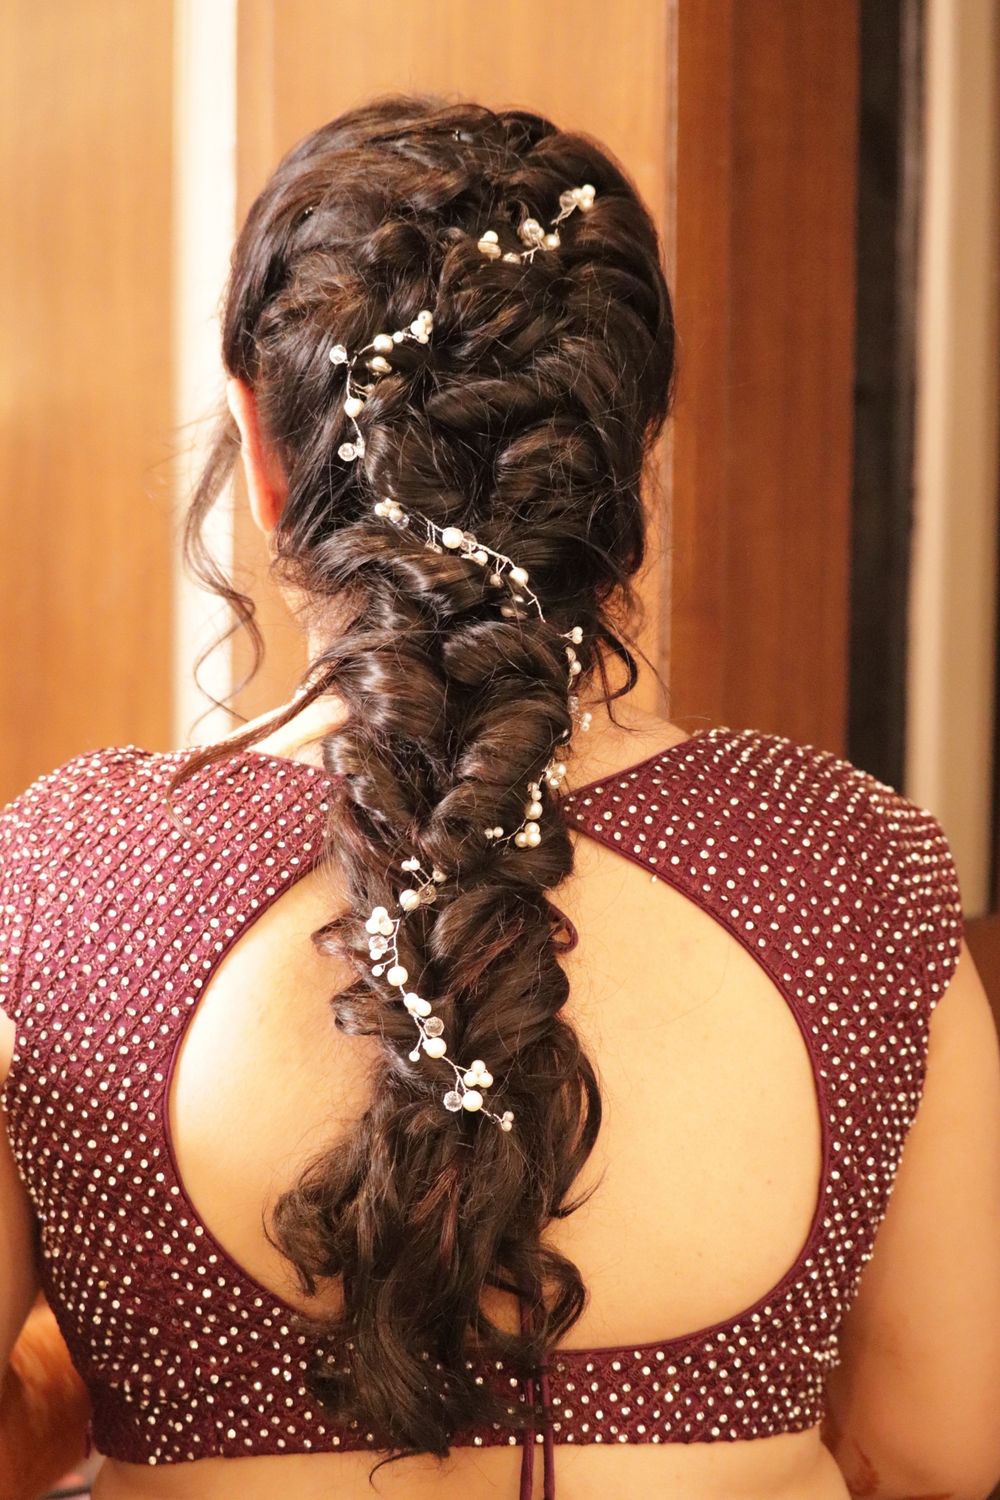 Photo From Hair styles - By Makeup by Rinki Vijay